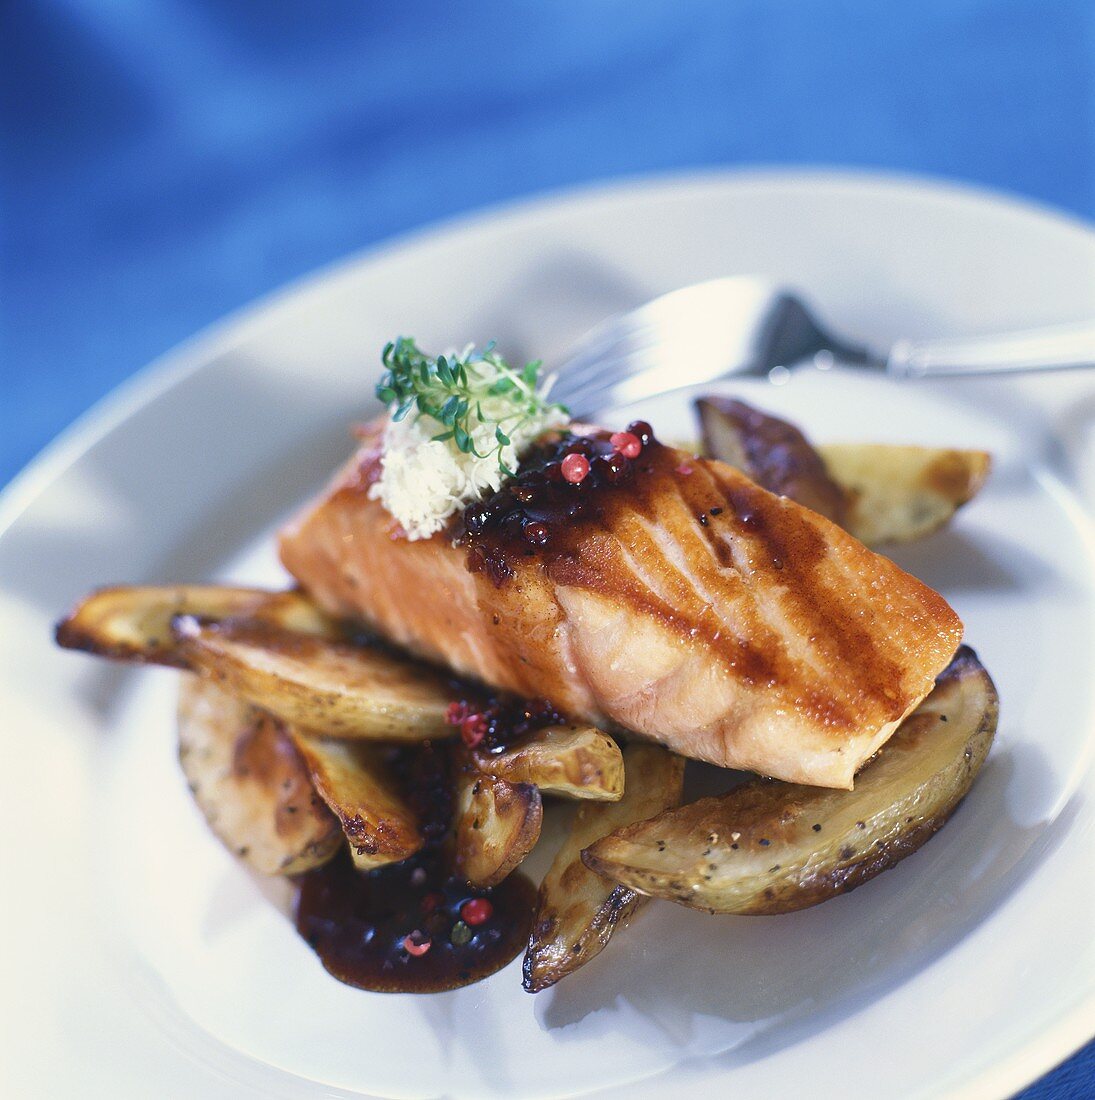 Grilled salmon with potatoes, pepper sauce, horseradish